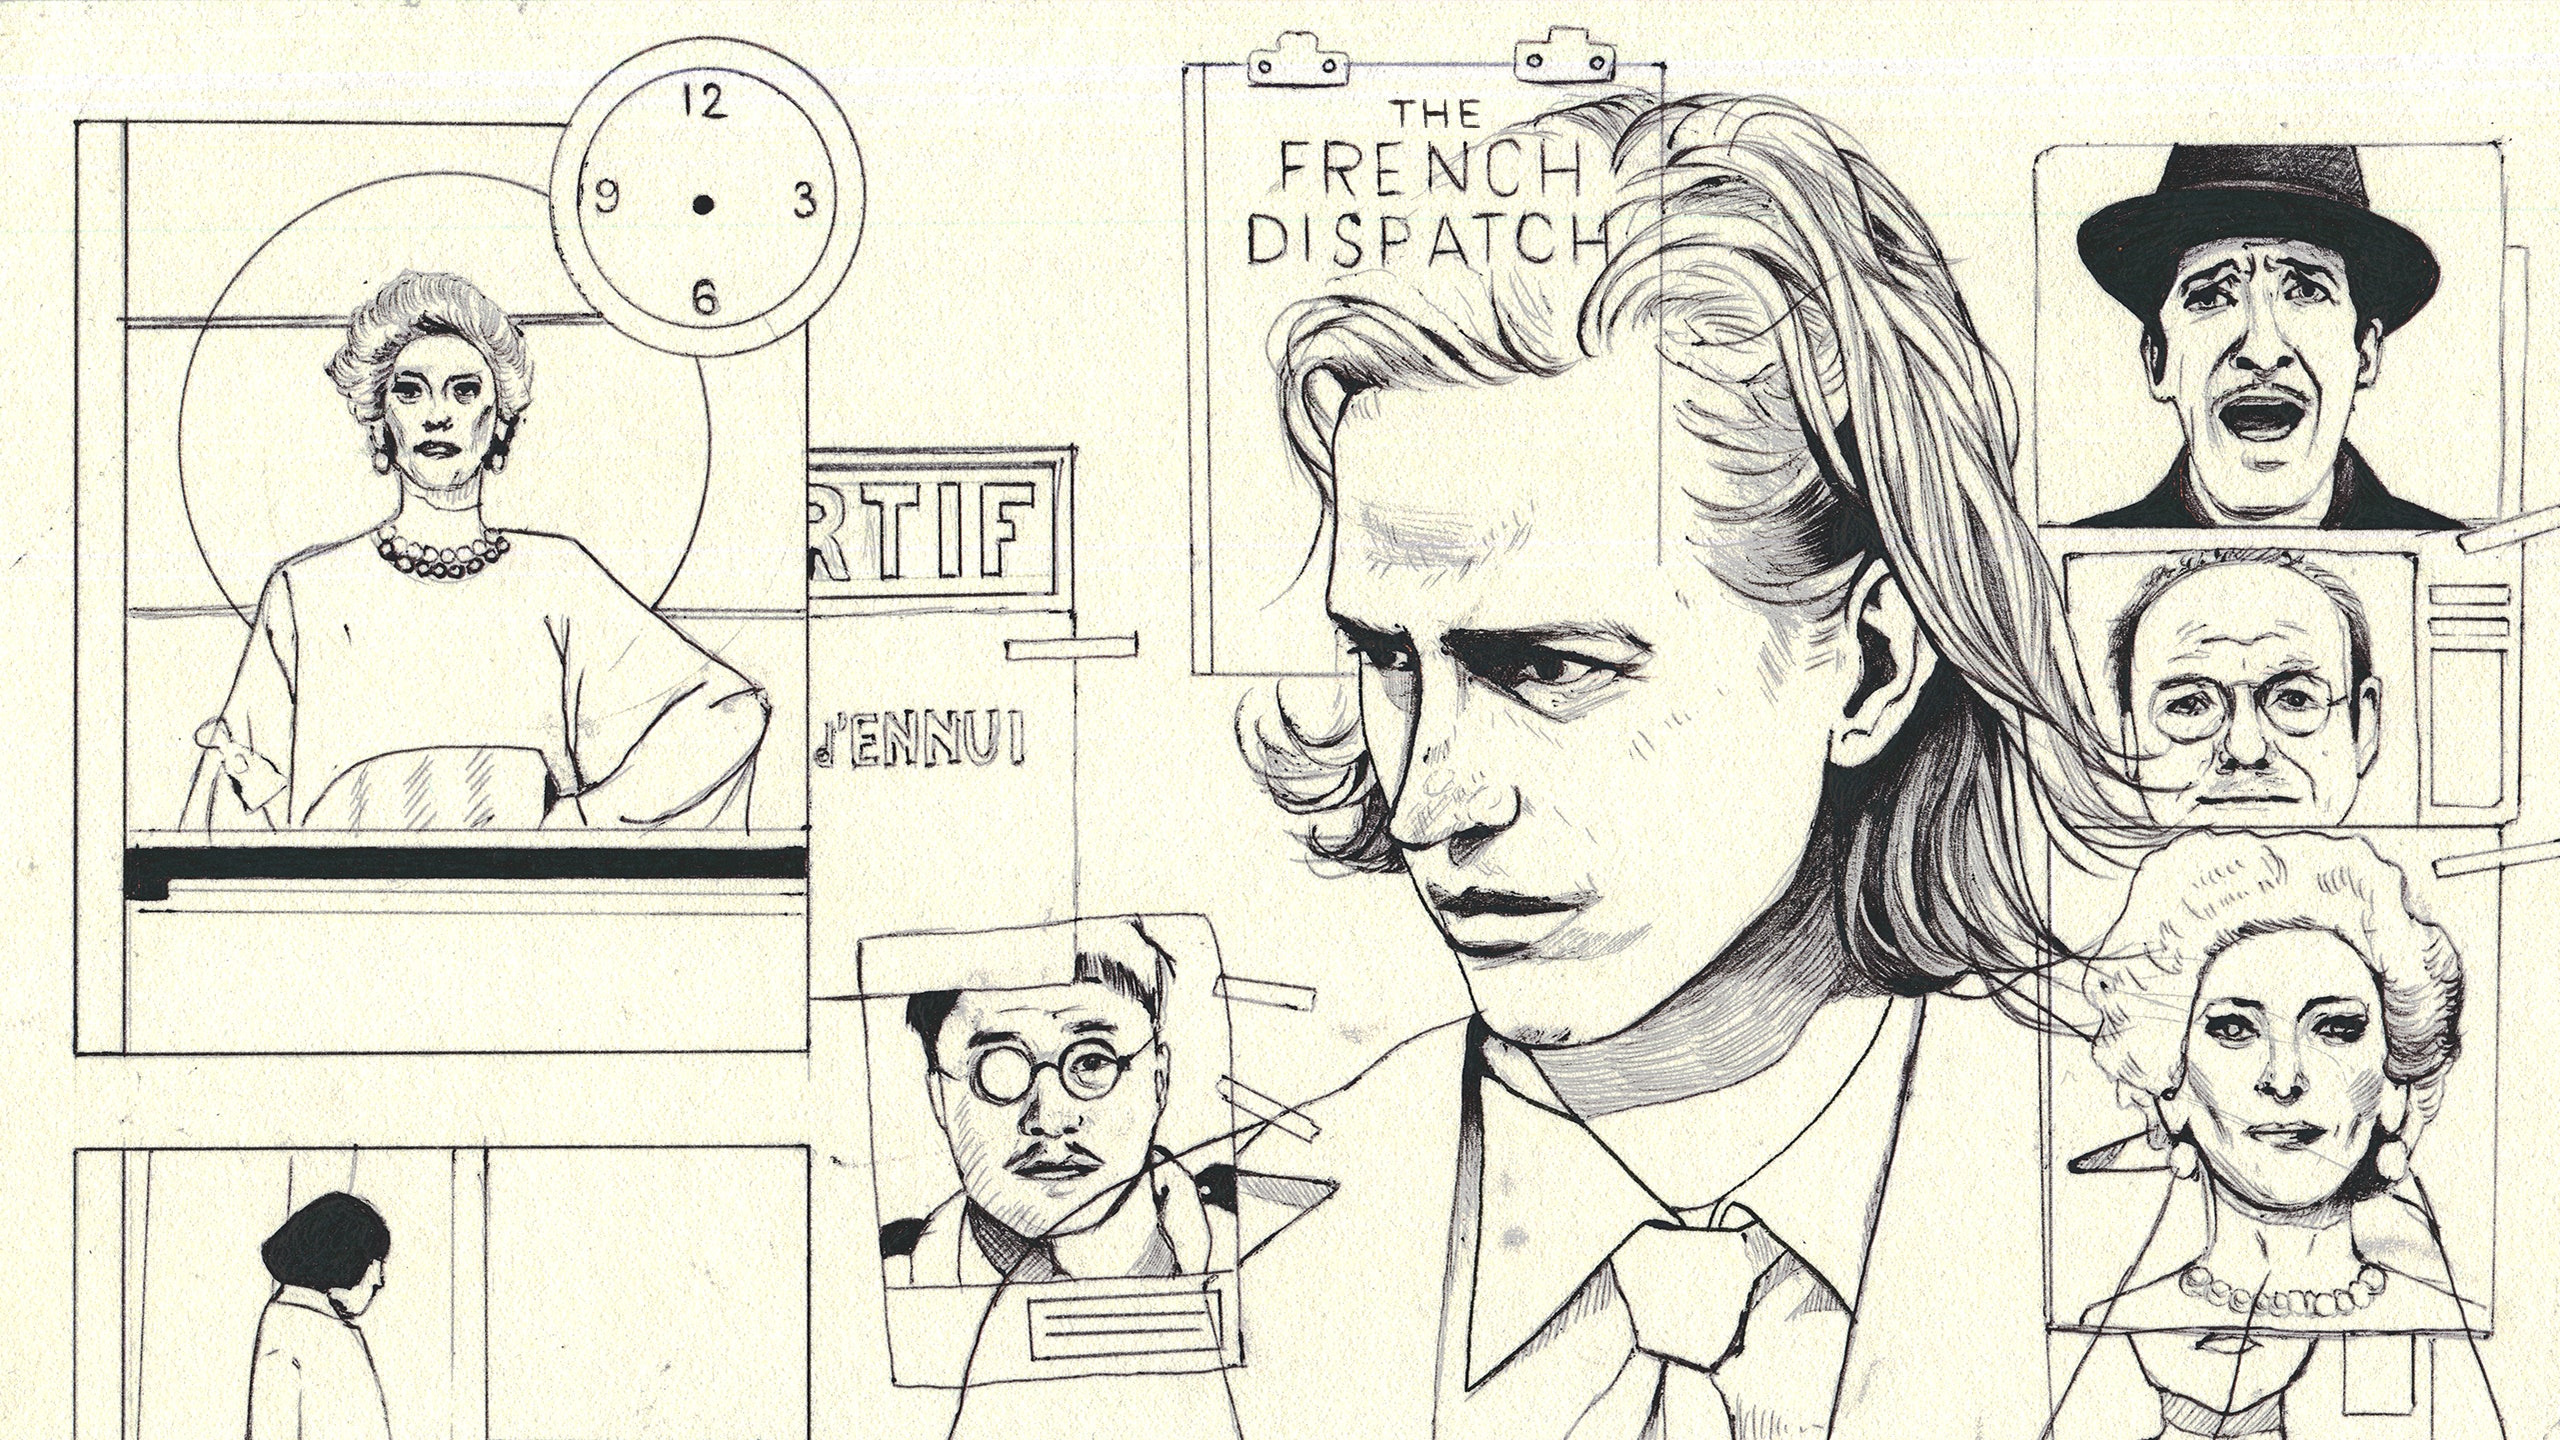 How Wes Anderson Turned The New Yorker Into French Dispatch